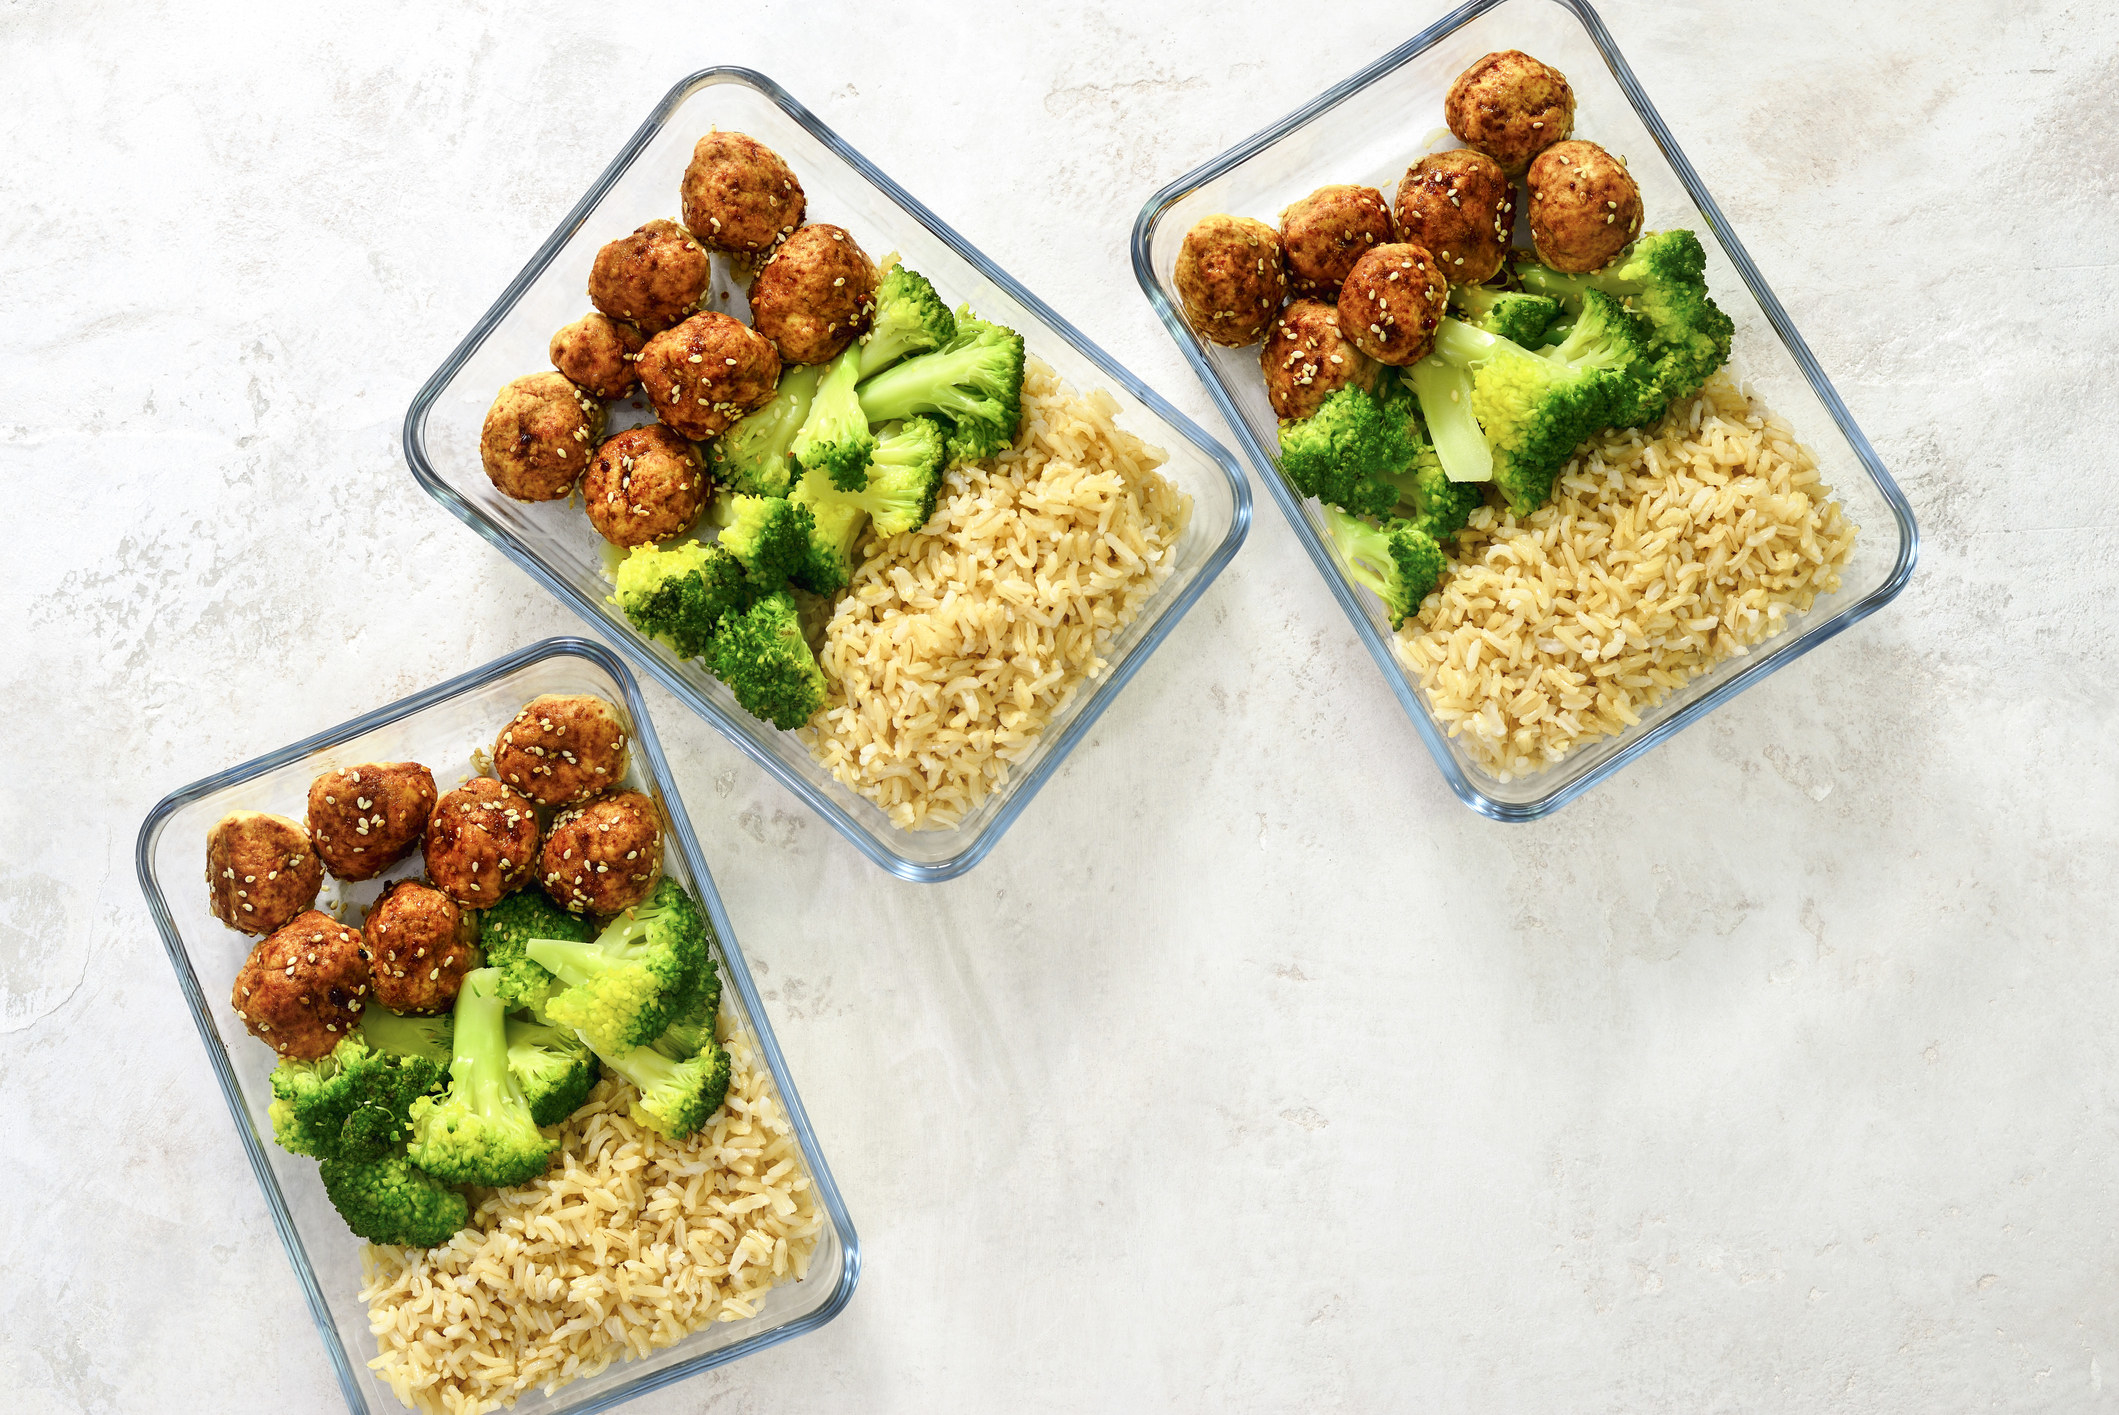 Meatballs and broccoli and rice in glass containers.